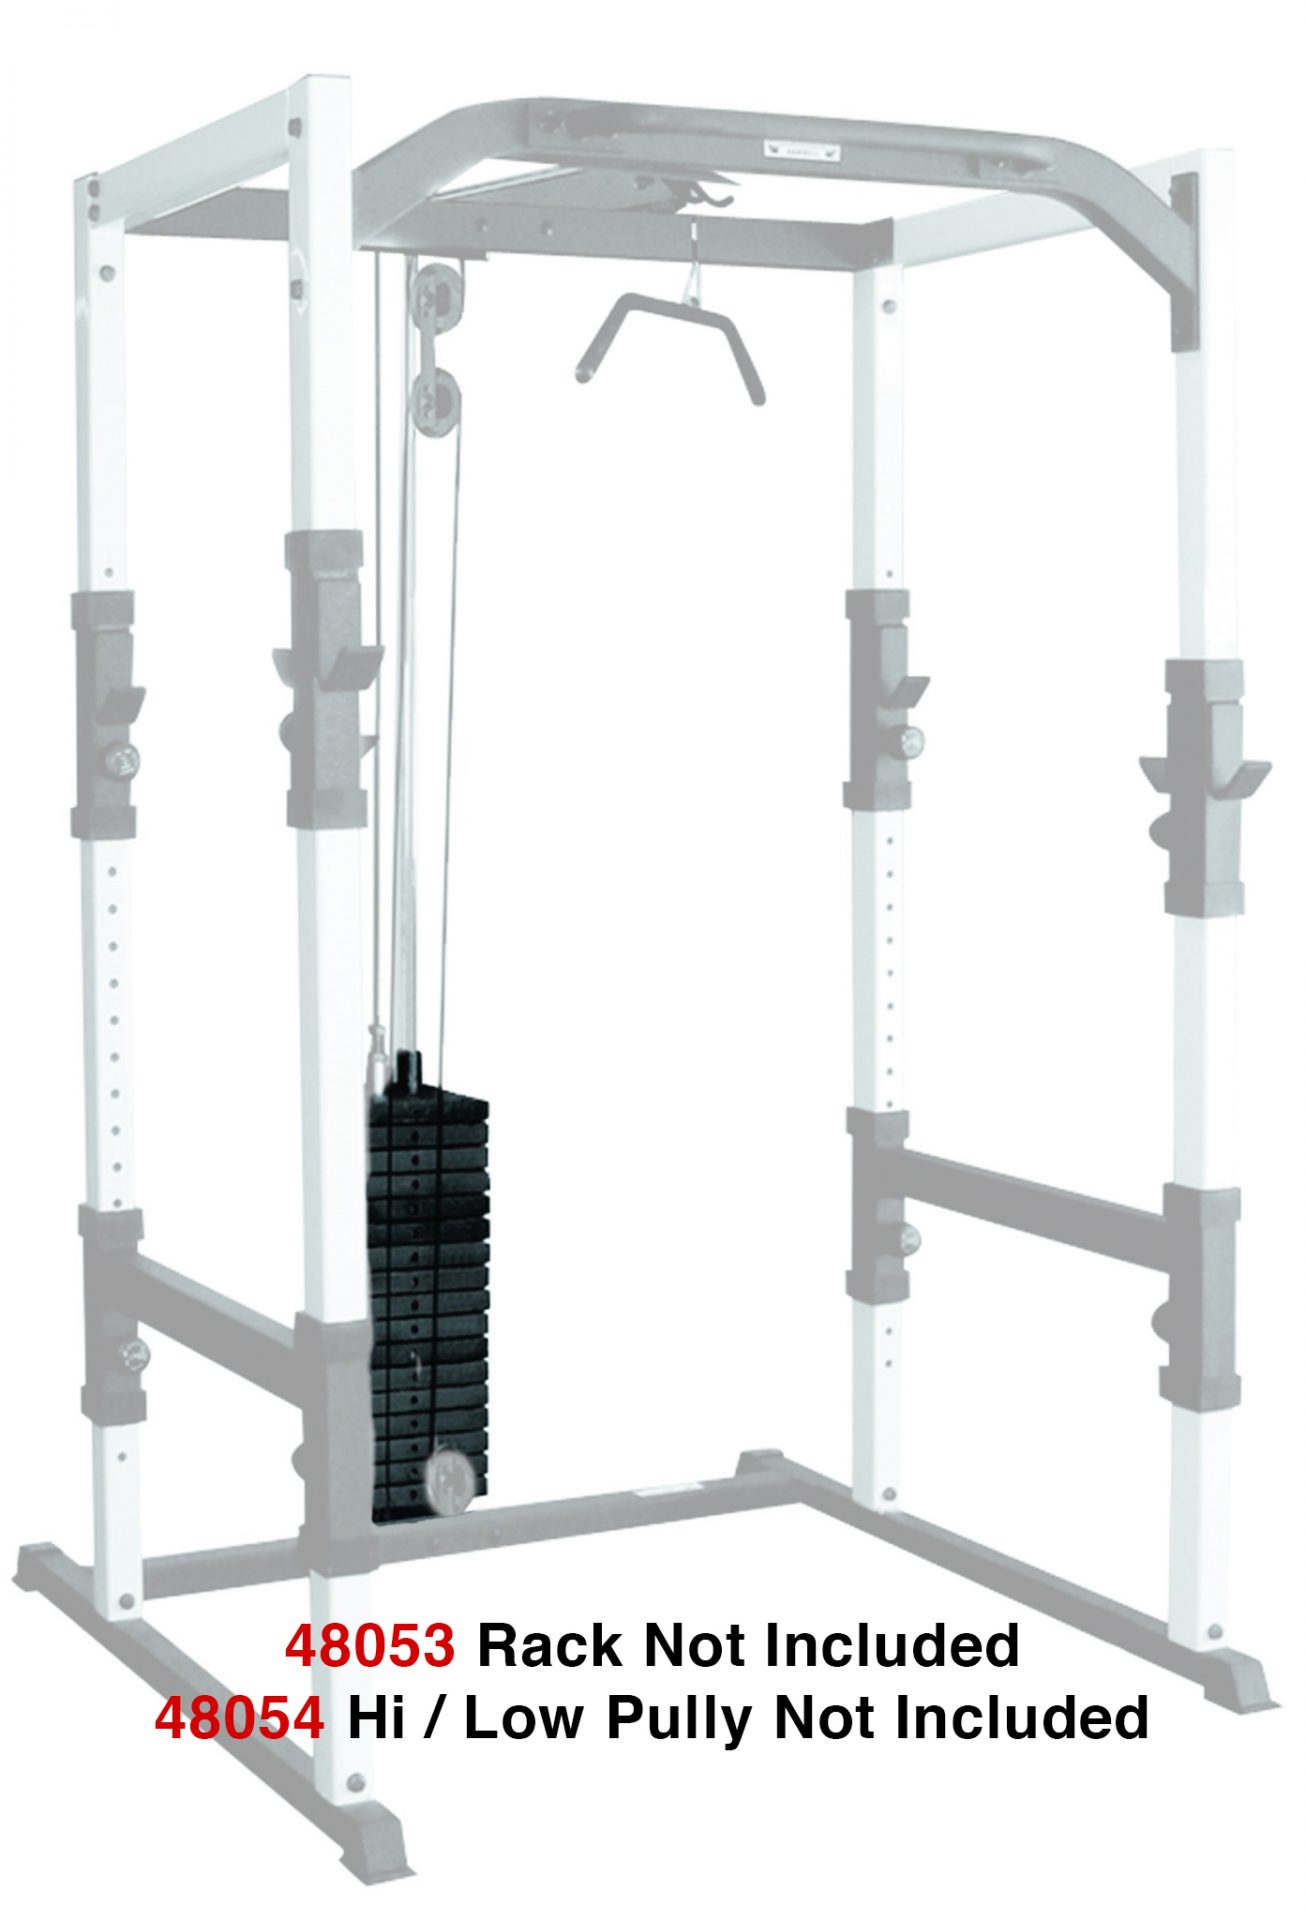 Lao Het is goedkoop Schurk Weight Stack Conversion Kit for Power Cage and Lat Machine